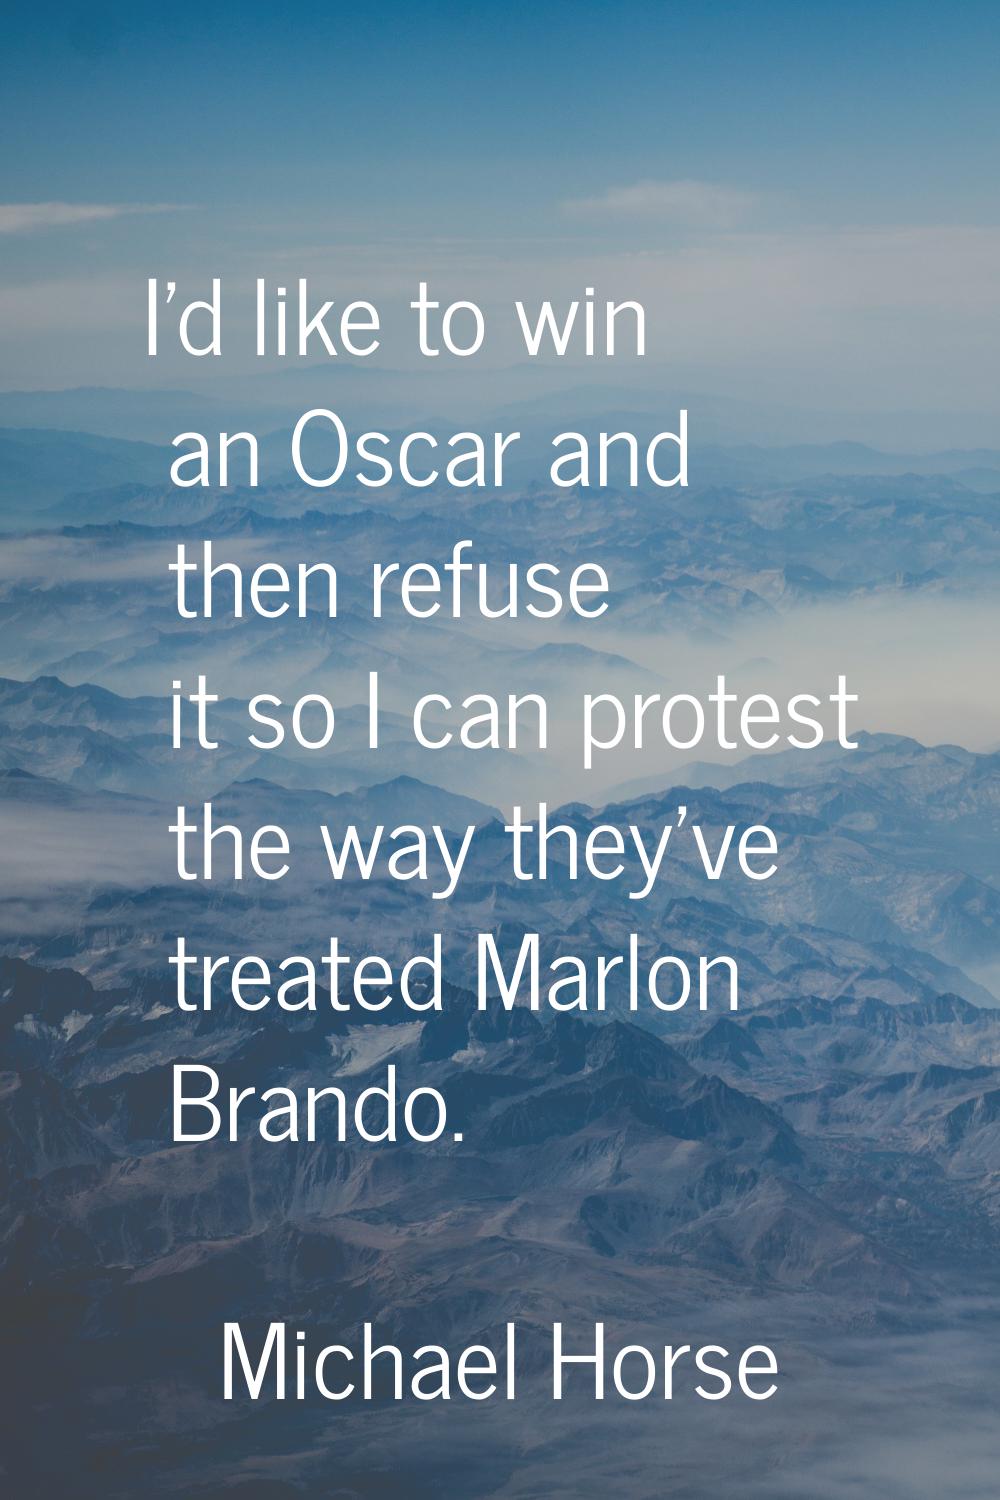 I'd like to win an Oscar and then refuse it so I can protest the way they've treated Marlon Brando.